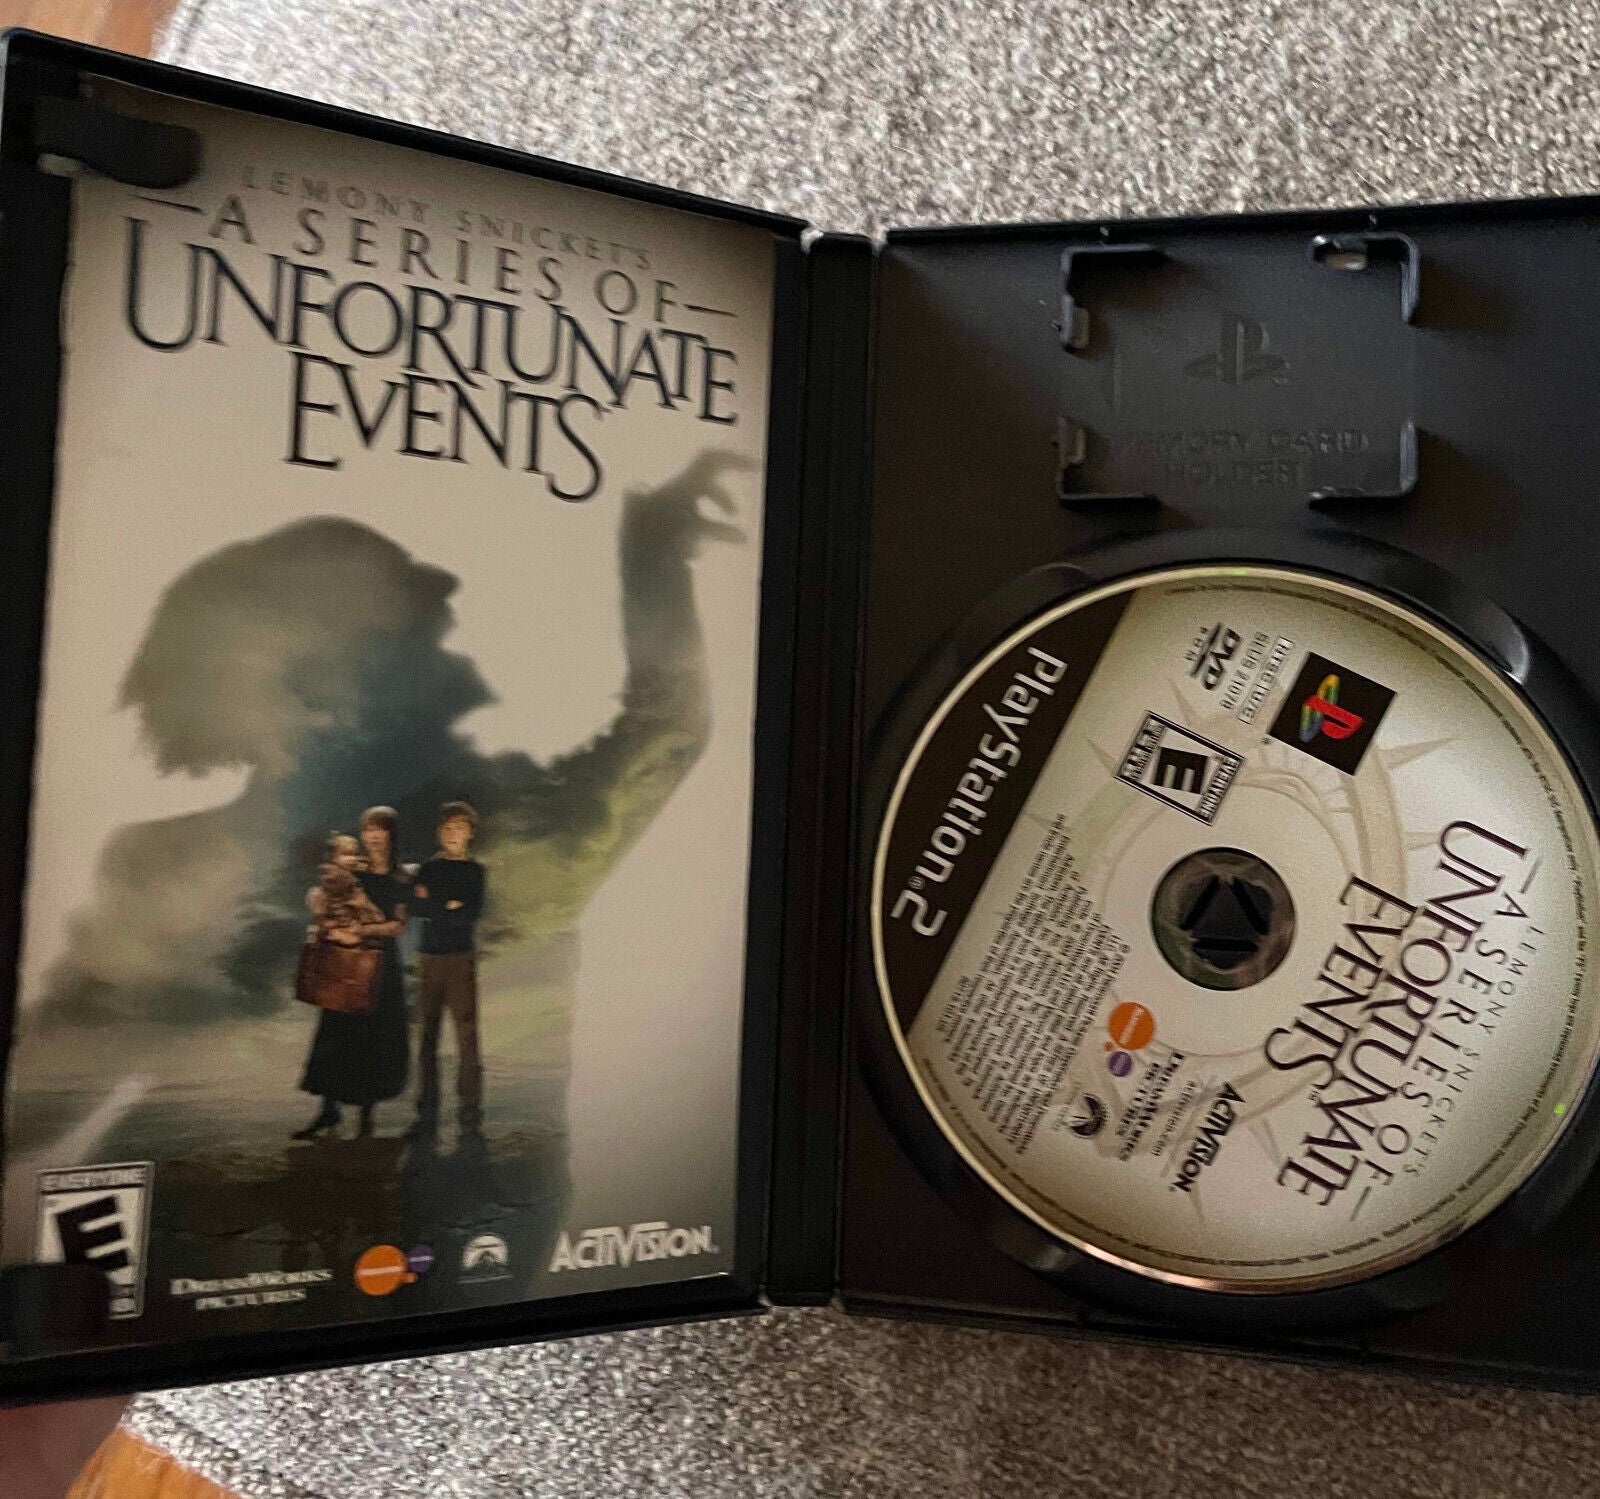 Lemony Snickets A Series of Unfortunate Events (Sony PlayStation 2, 2004) PS2